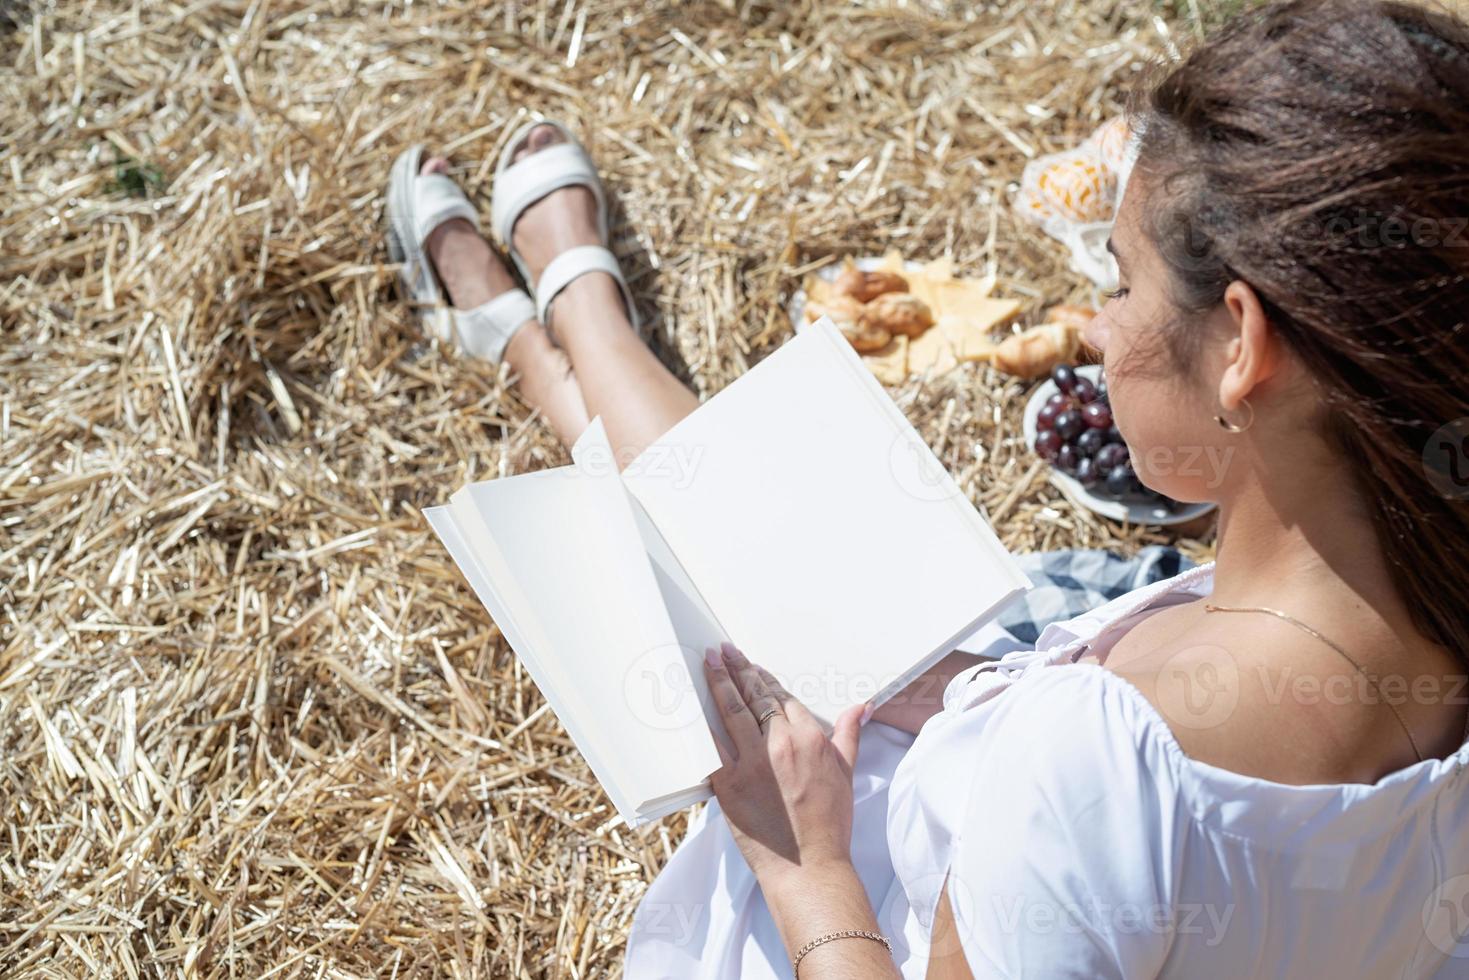 Young woman in white dress sitting on haystack in harvested field, reading blank book. Book mockup photo